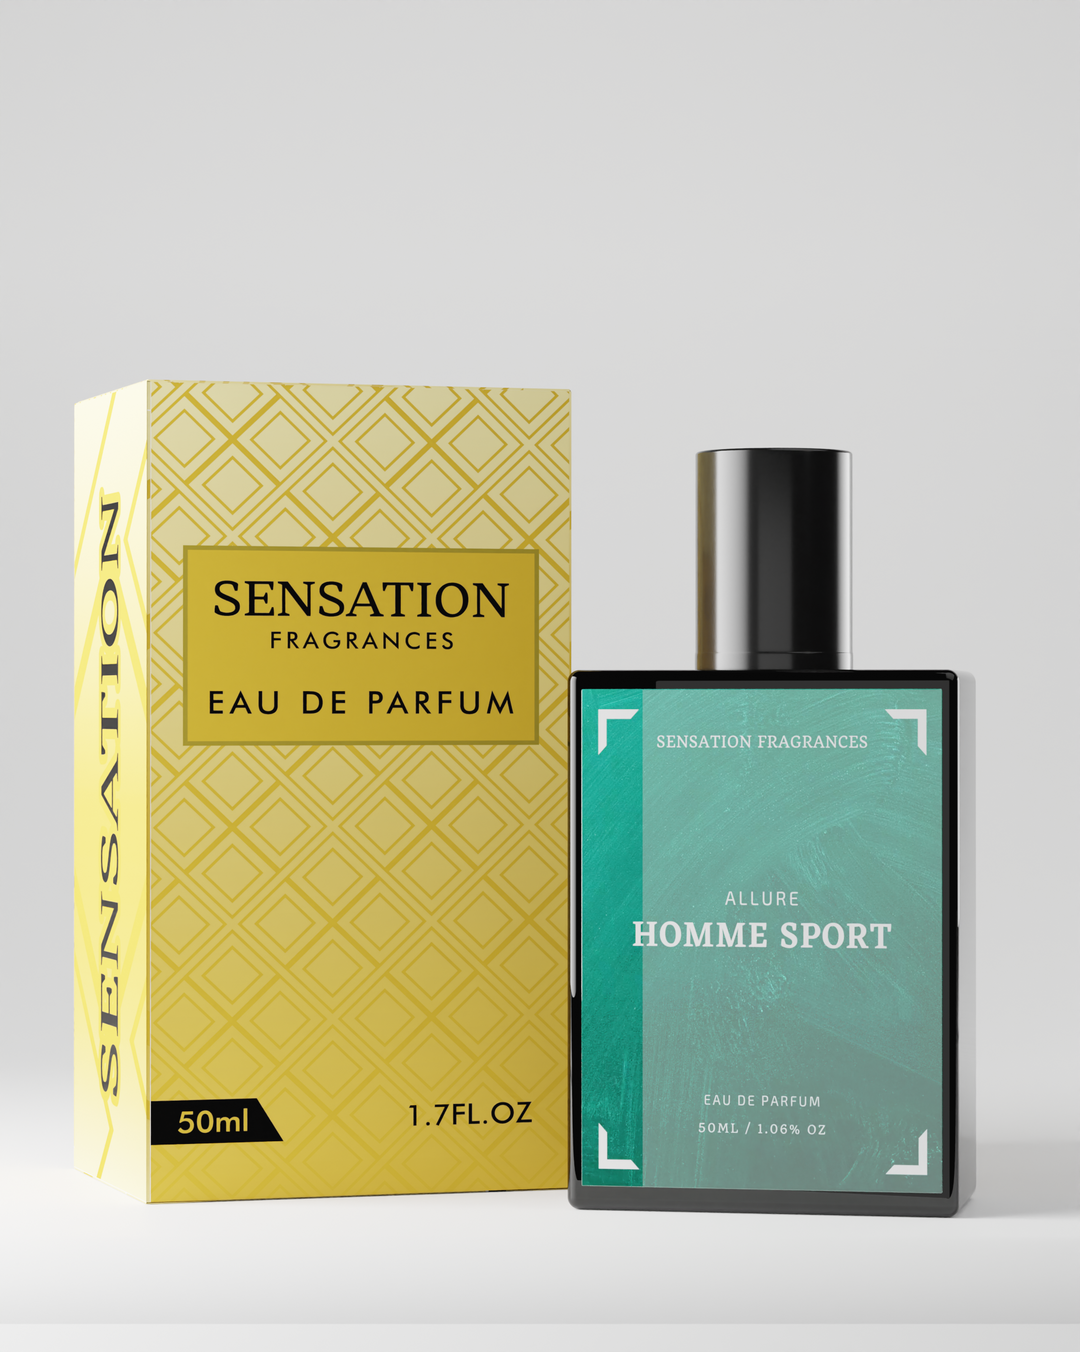 Our Impression of - ALLURE Homme Sport